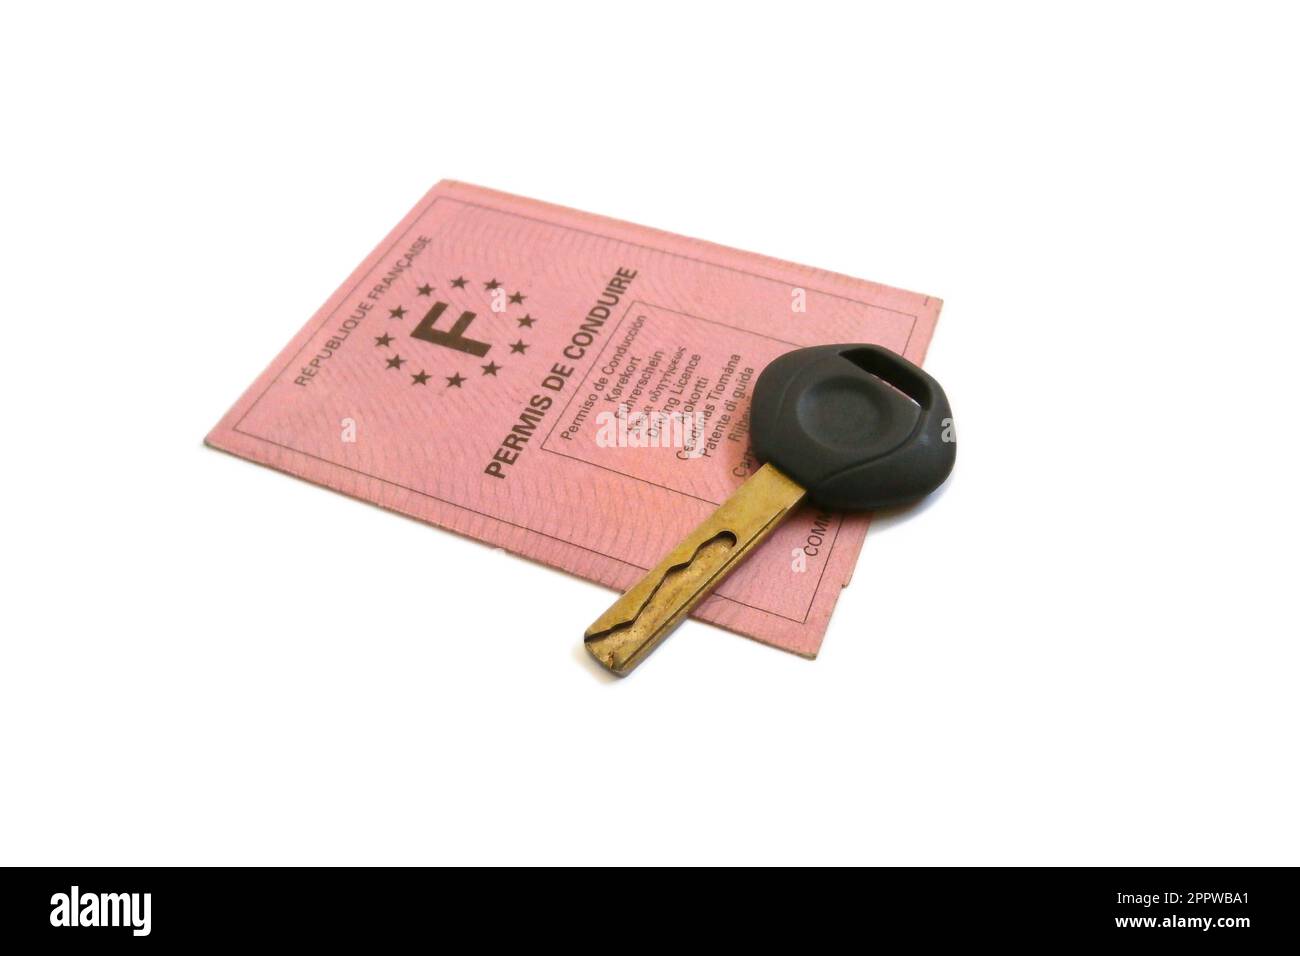 Studio shot of a French driver's license and car key on white background Stock Photo